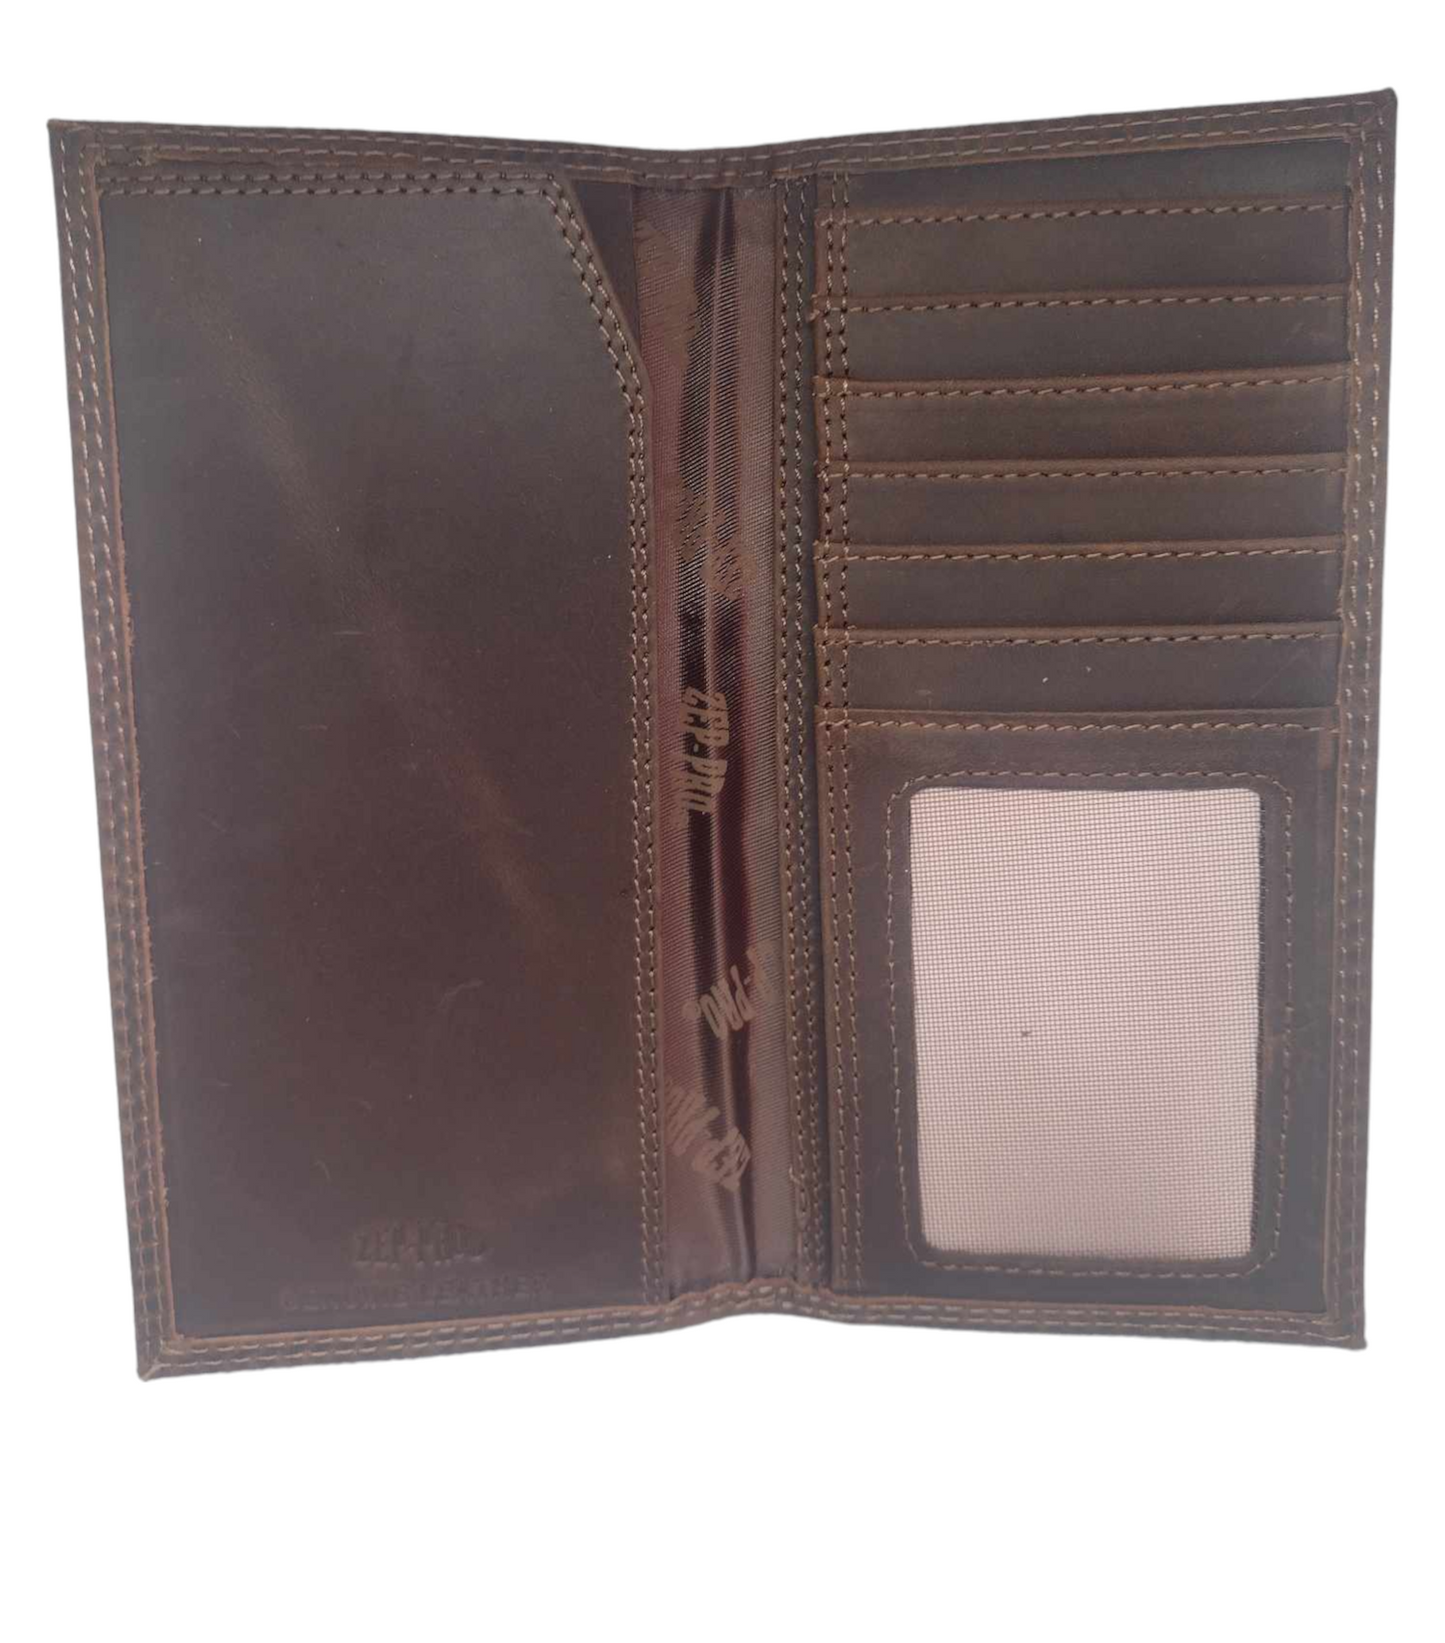 Tennessee Volunteers Concho Emblem Crazyhorse Leather Secretary Wallet